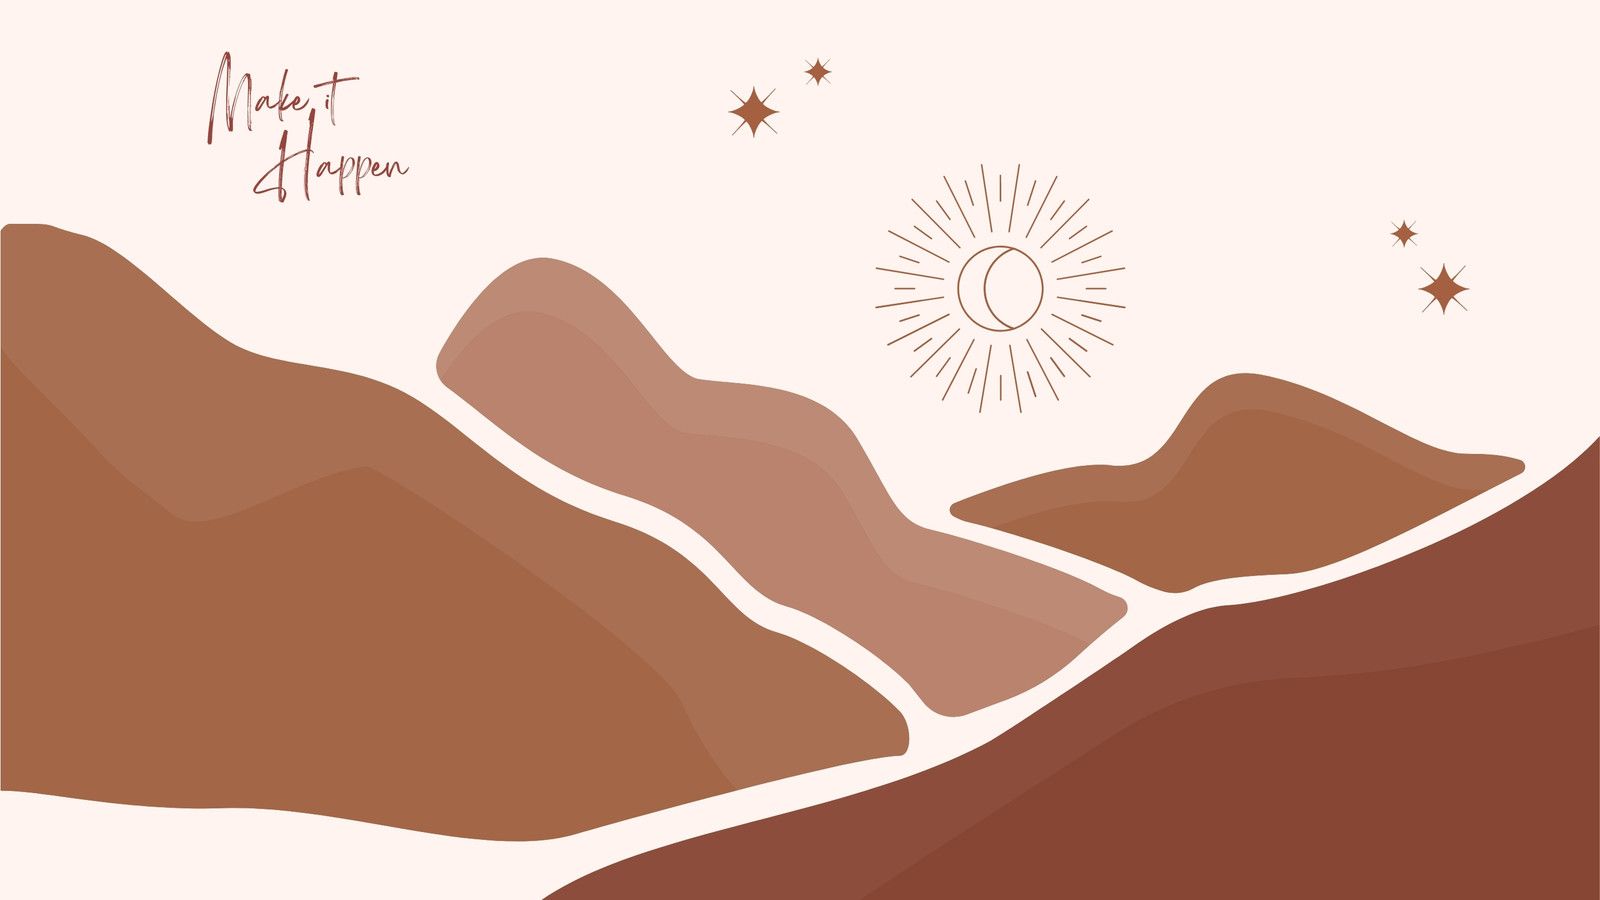 A landscape with mountains and stars - Brown, landscape, boho